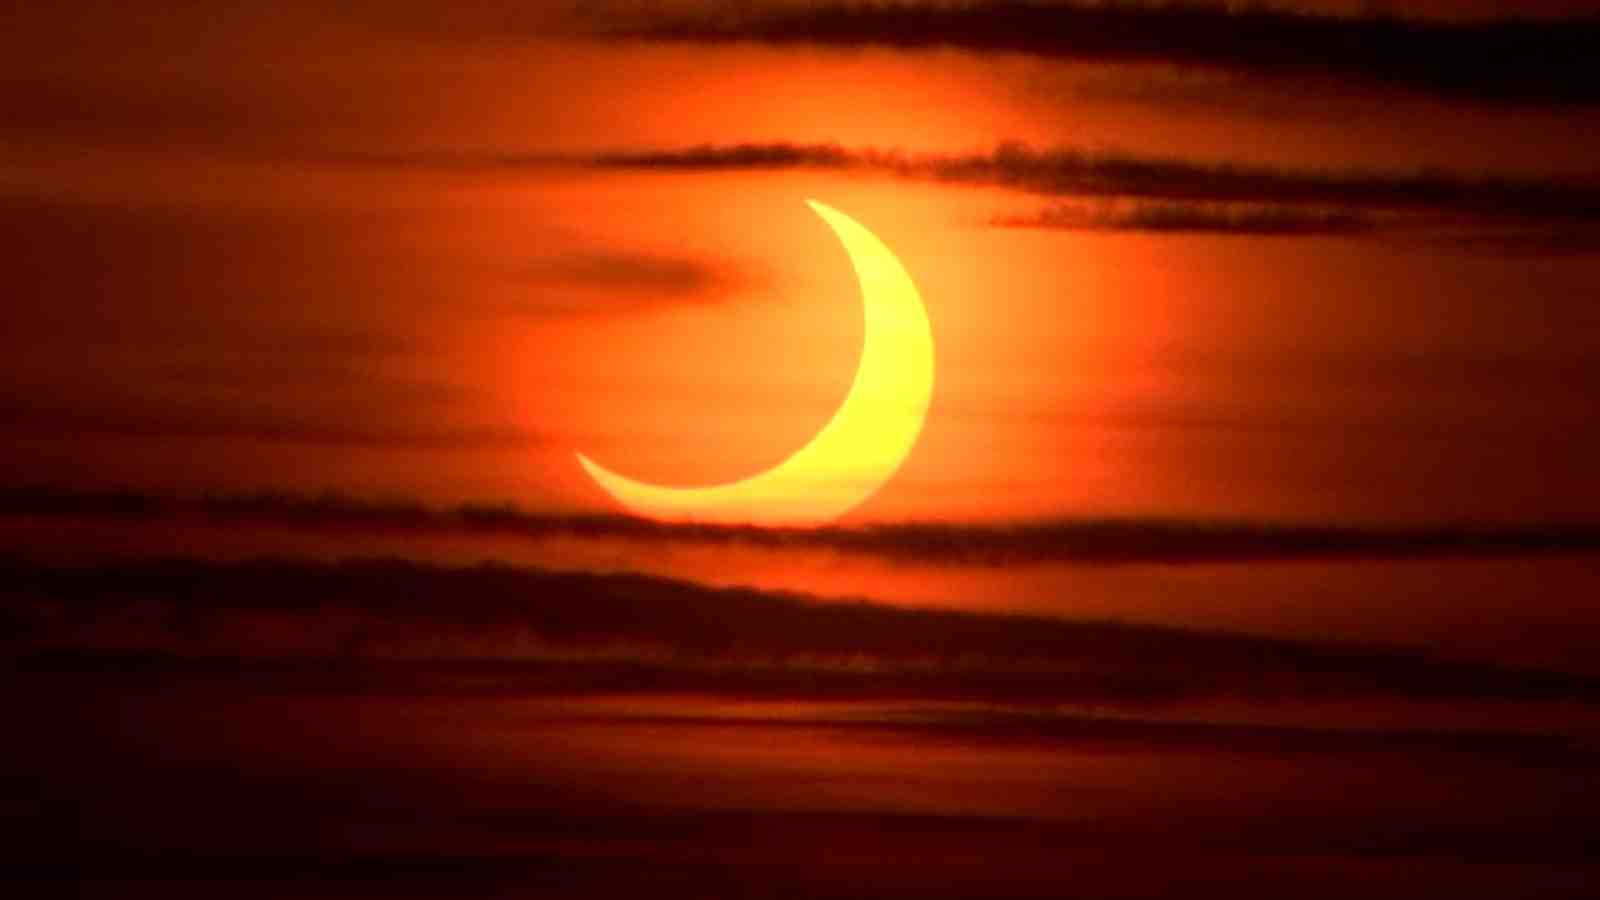 What Time is the solar eclipse 2021?